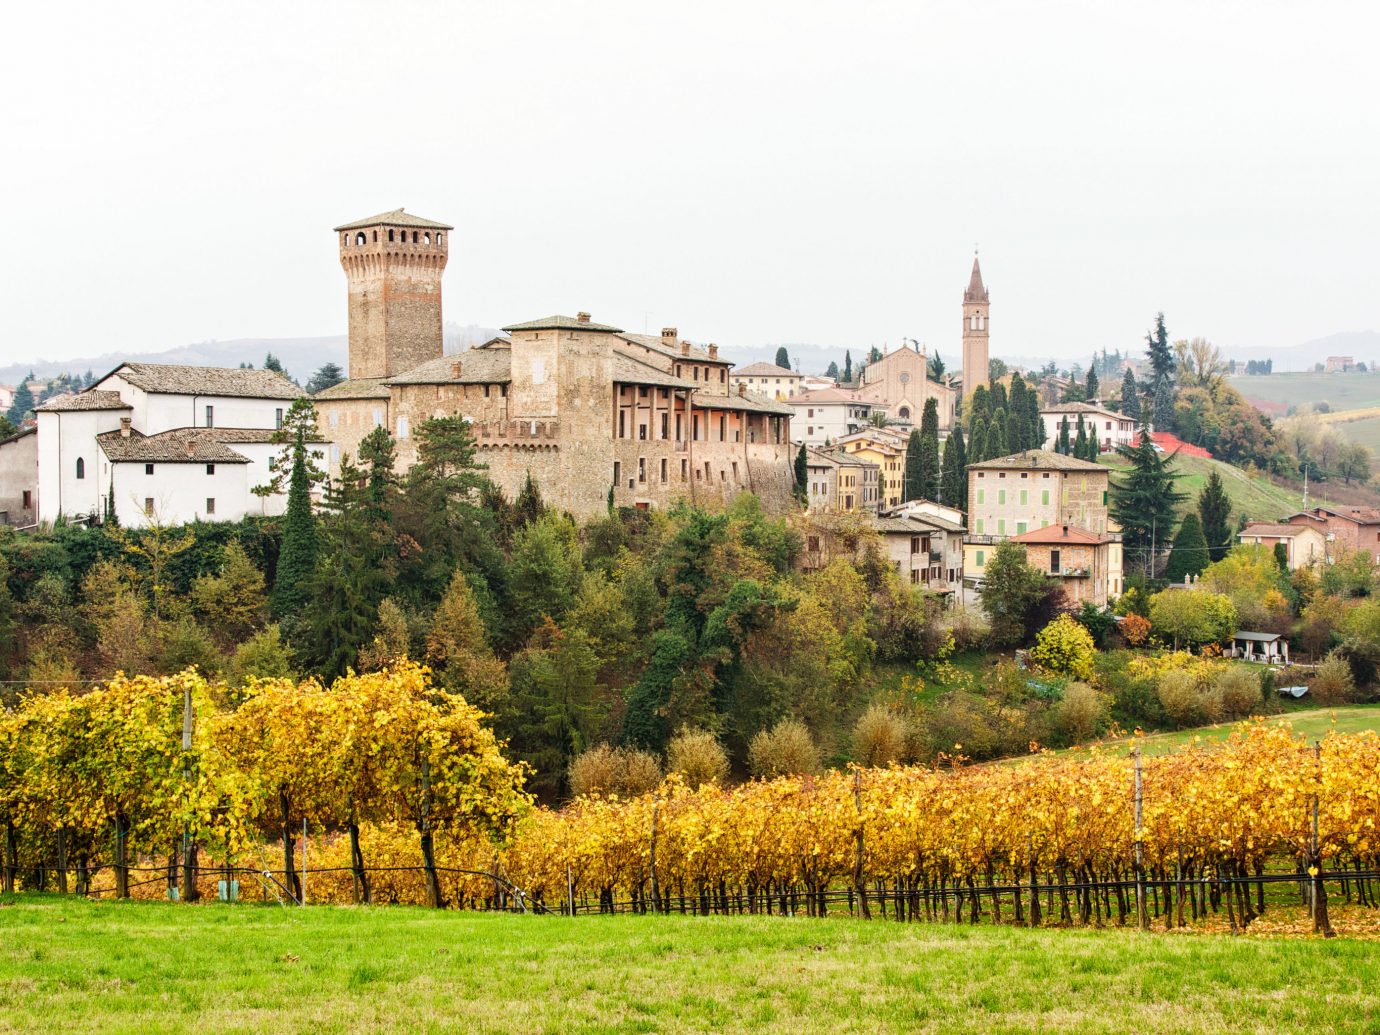 europe Italy Off-the-beaten Path Trip Ideas Village sky Town field agriculture Vineyard rural area tree château stately home estate meadow national trust for places of historic interest or natural beauty landscape hill grass house grassland castle autumn middle ages